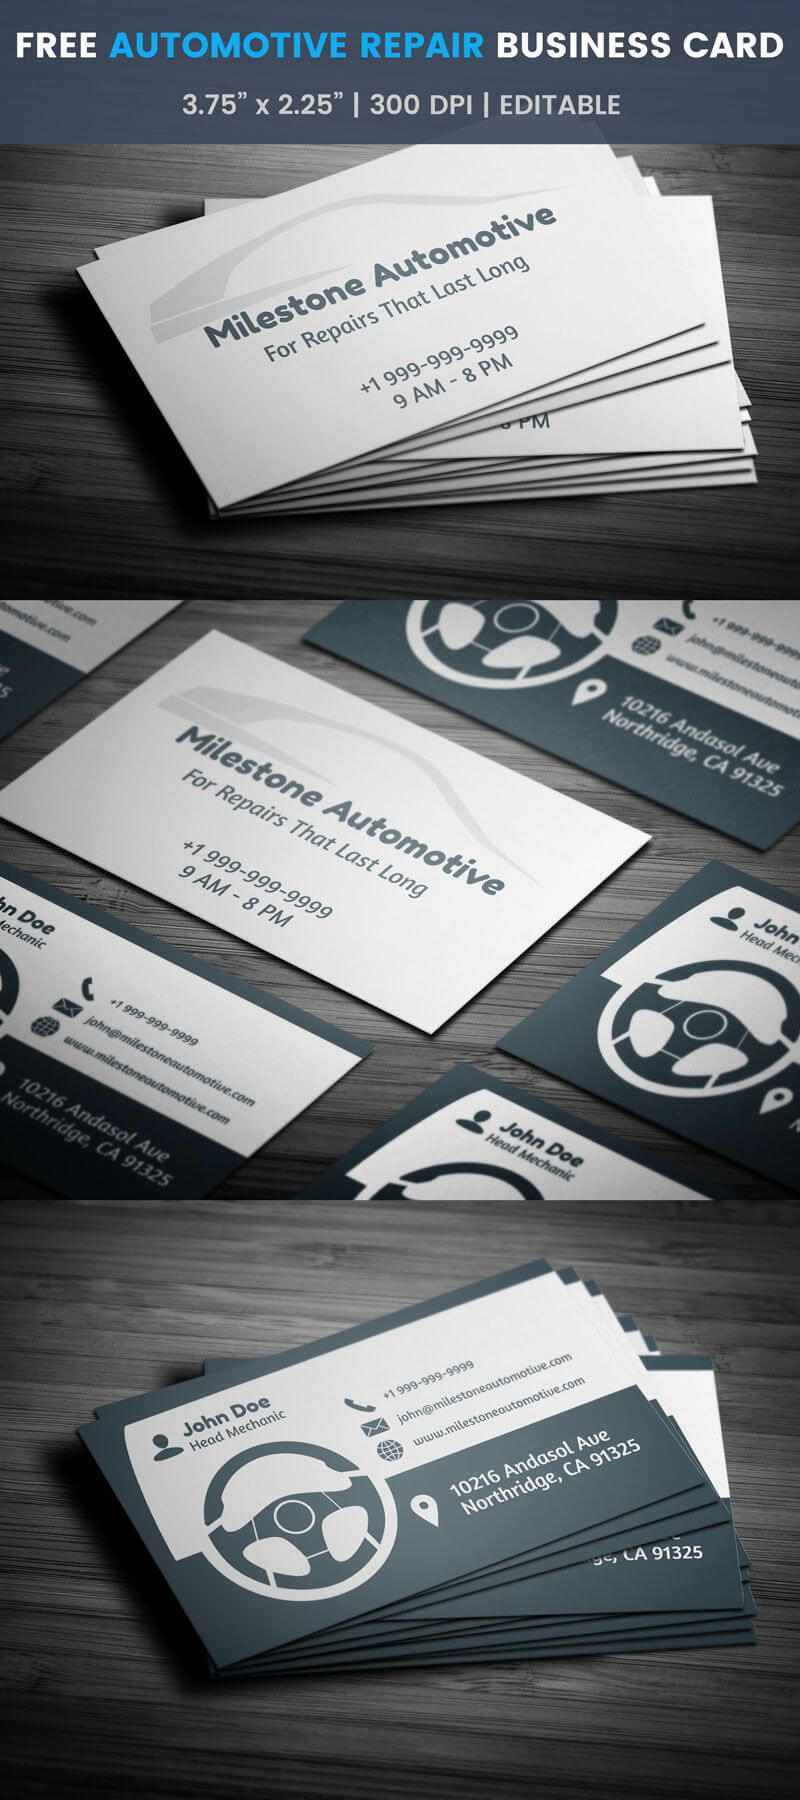 Automotive Repair Business Card – Full Preview | Free Throughout Automotive Business Card Templates